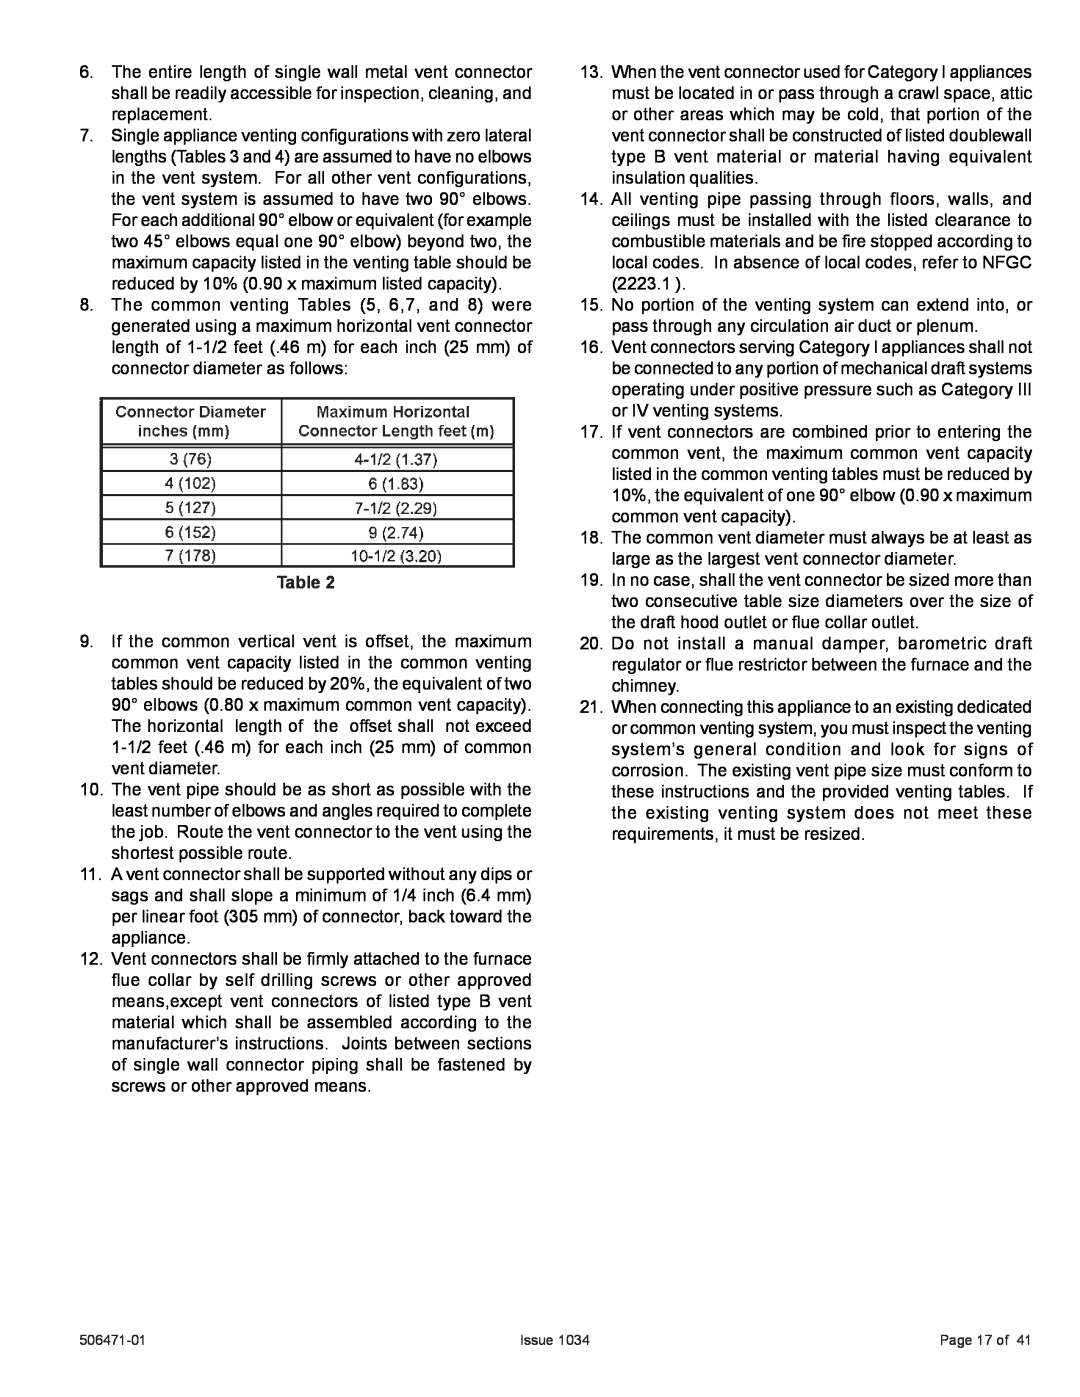 Allied Air Enterprises 80G1UH2V, A80UH2V installation instructions Issue, Page 17 of 